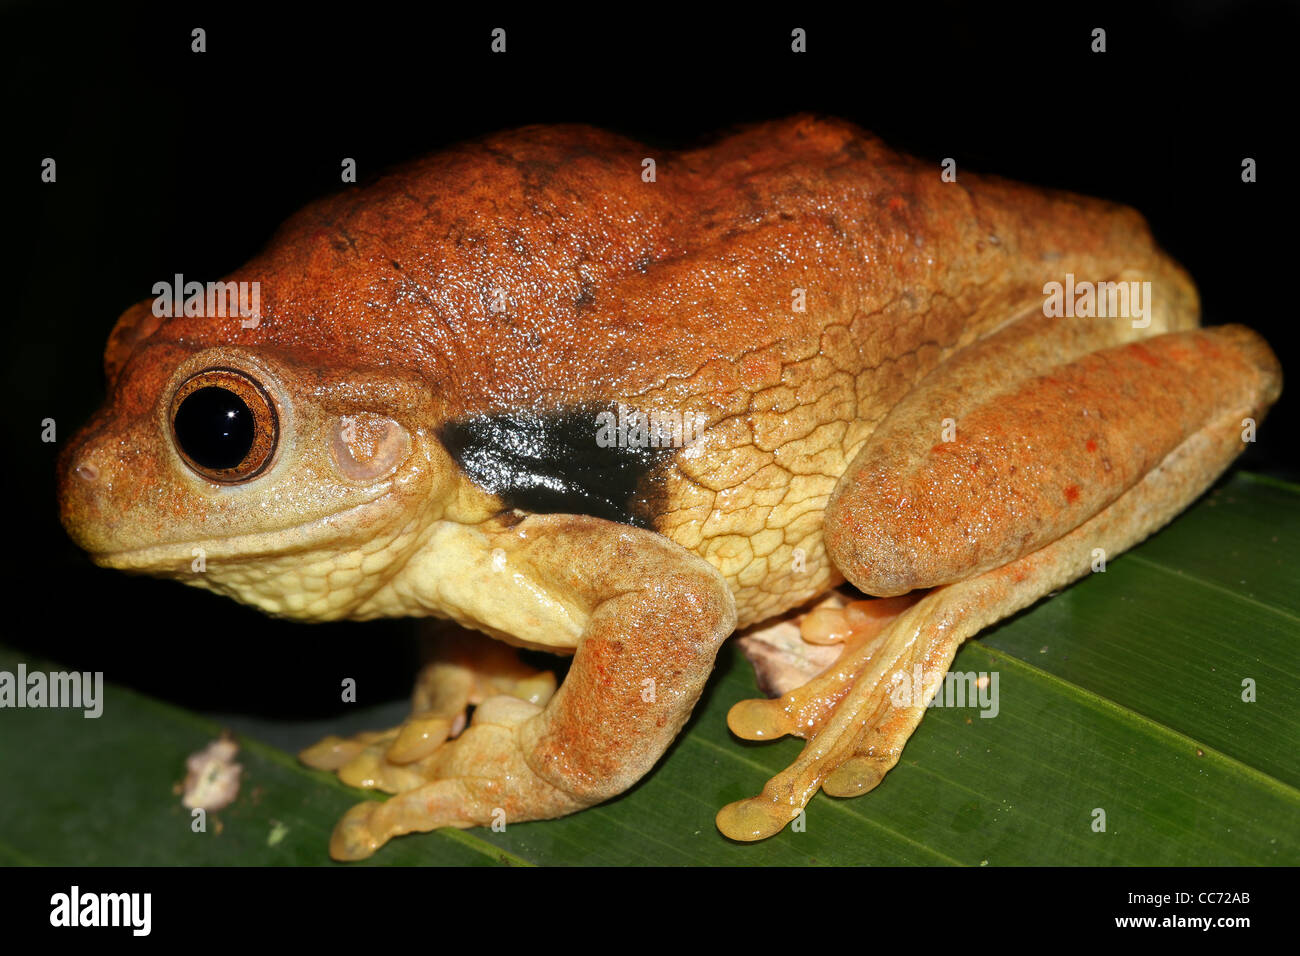 A chubby and cute Suriname Golden-eyed Treefrog (Trachycephalus coriaceus) in the Peruvian Amazon Isolated with space for text Stock Photo